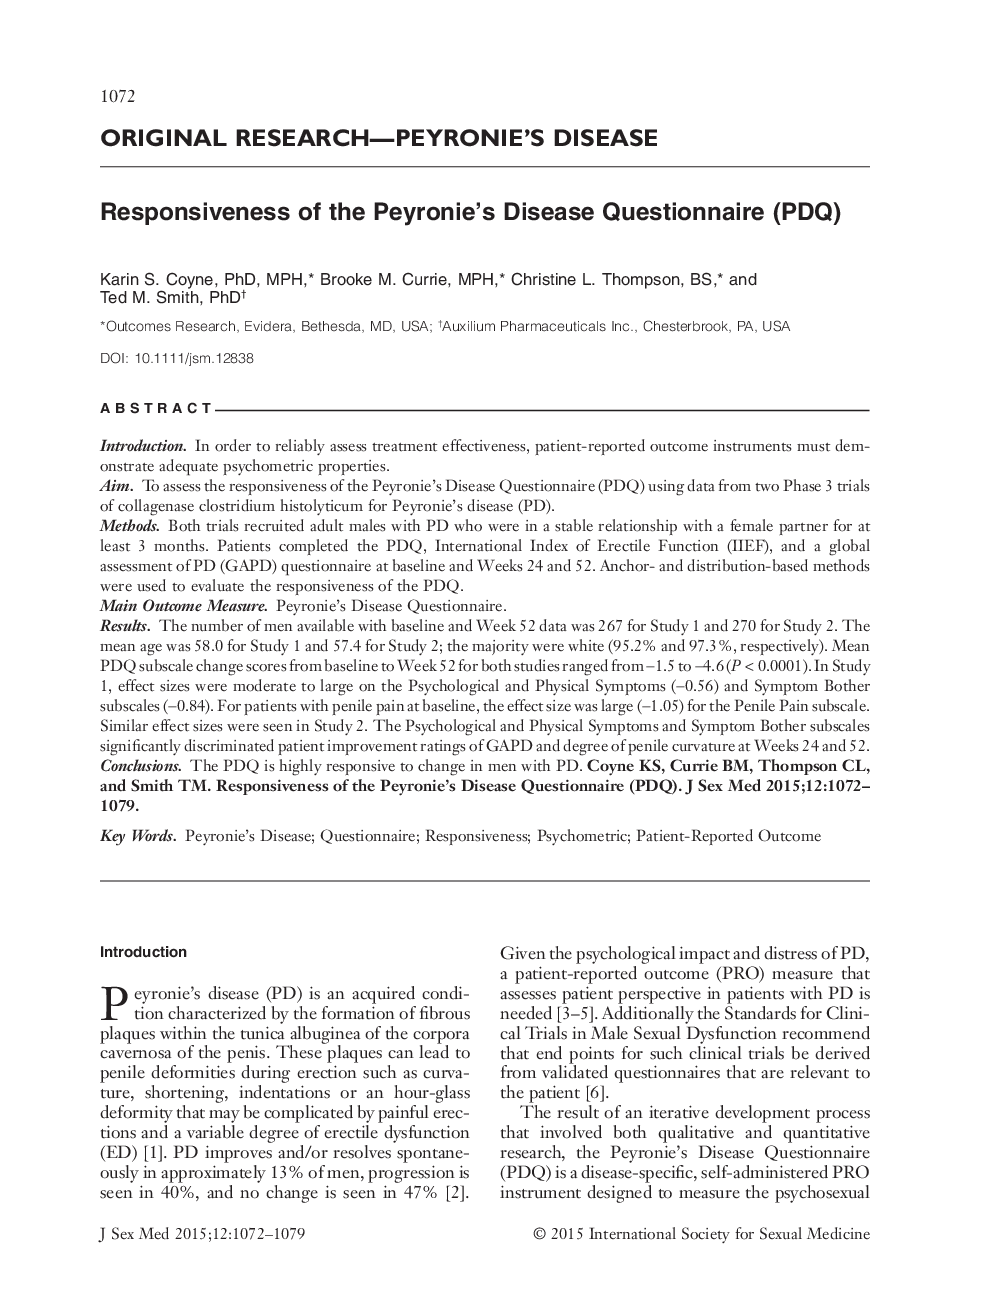 Responsiveness of the Peyronie's Disease Questionnaire (PDQ)